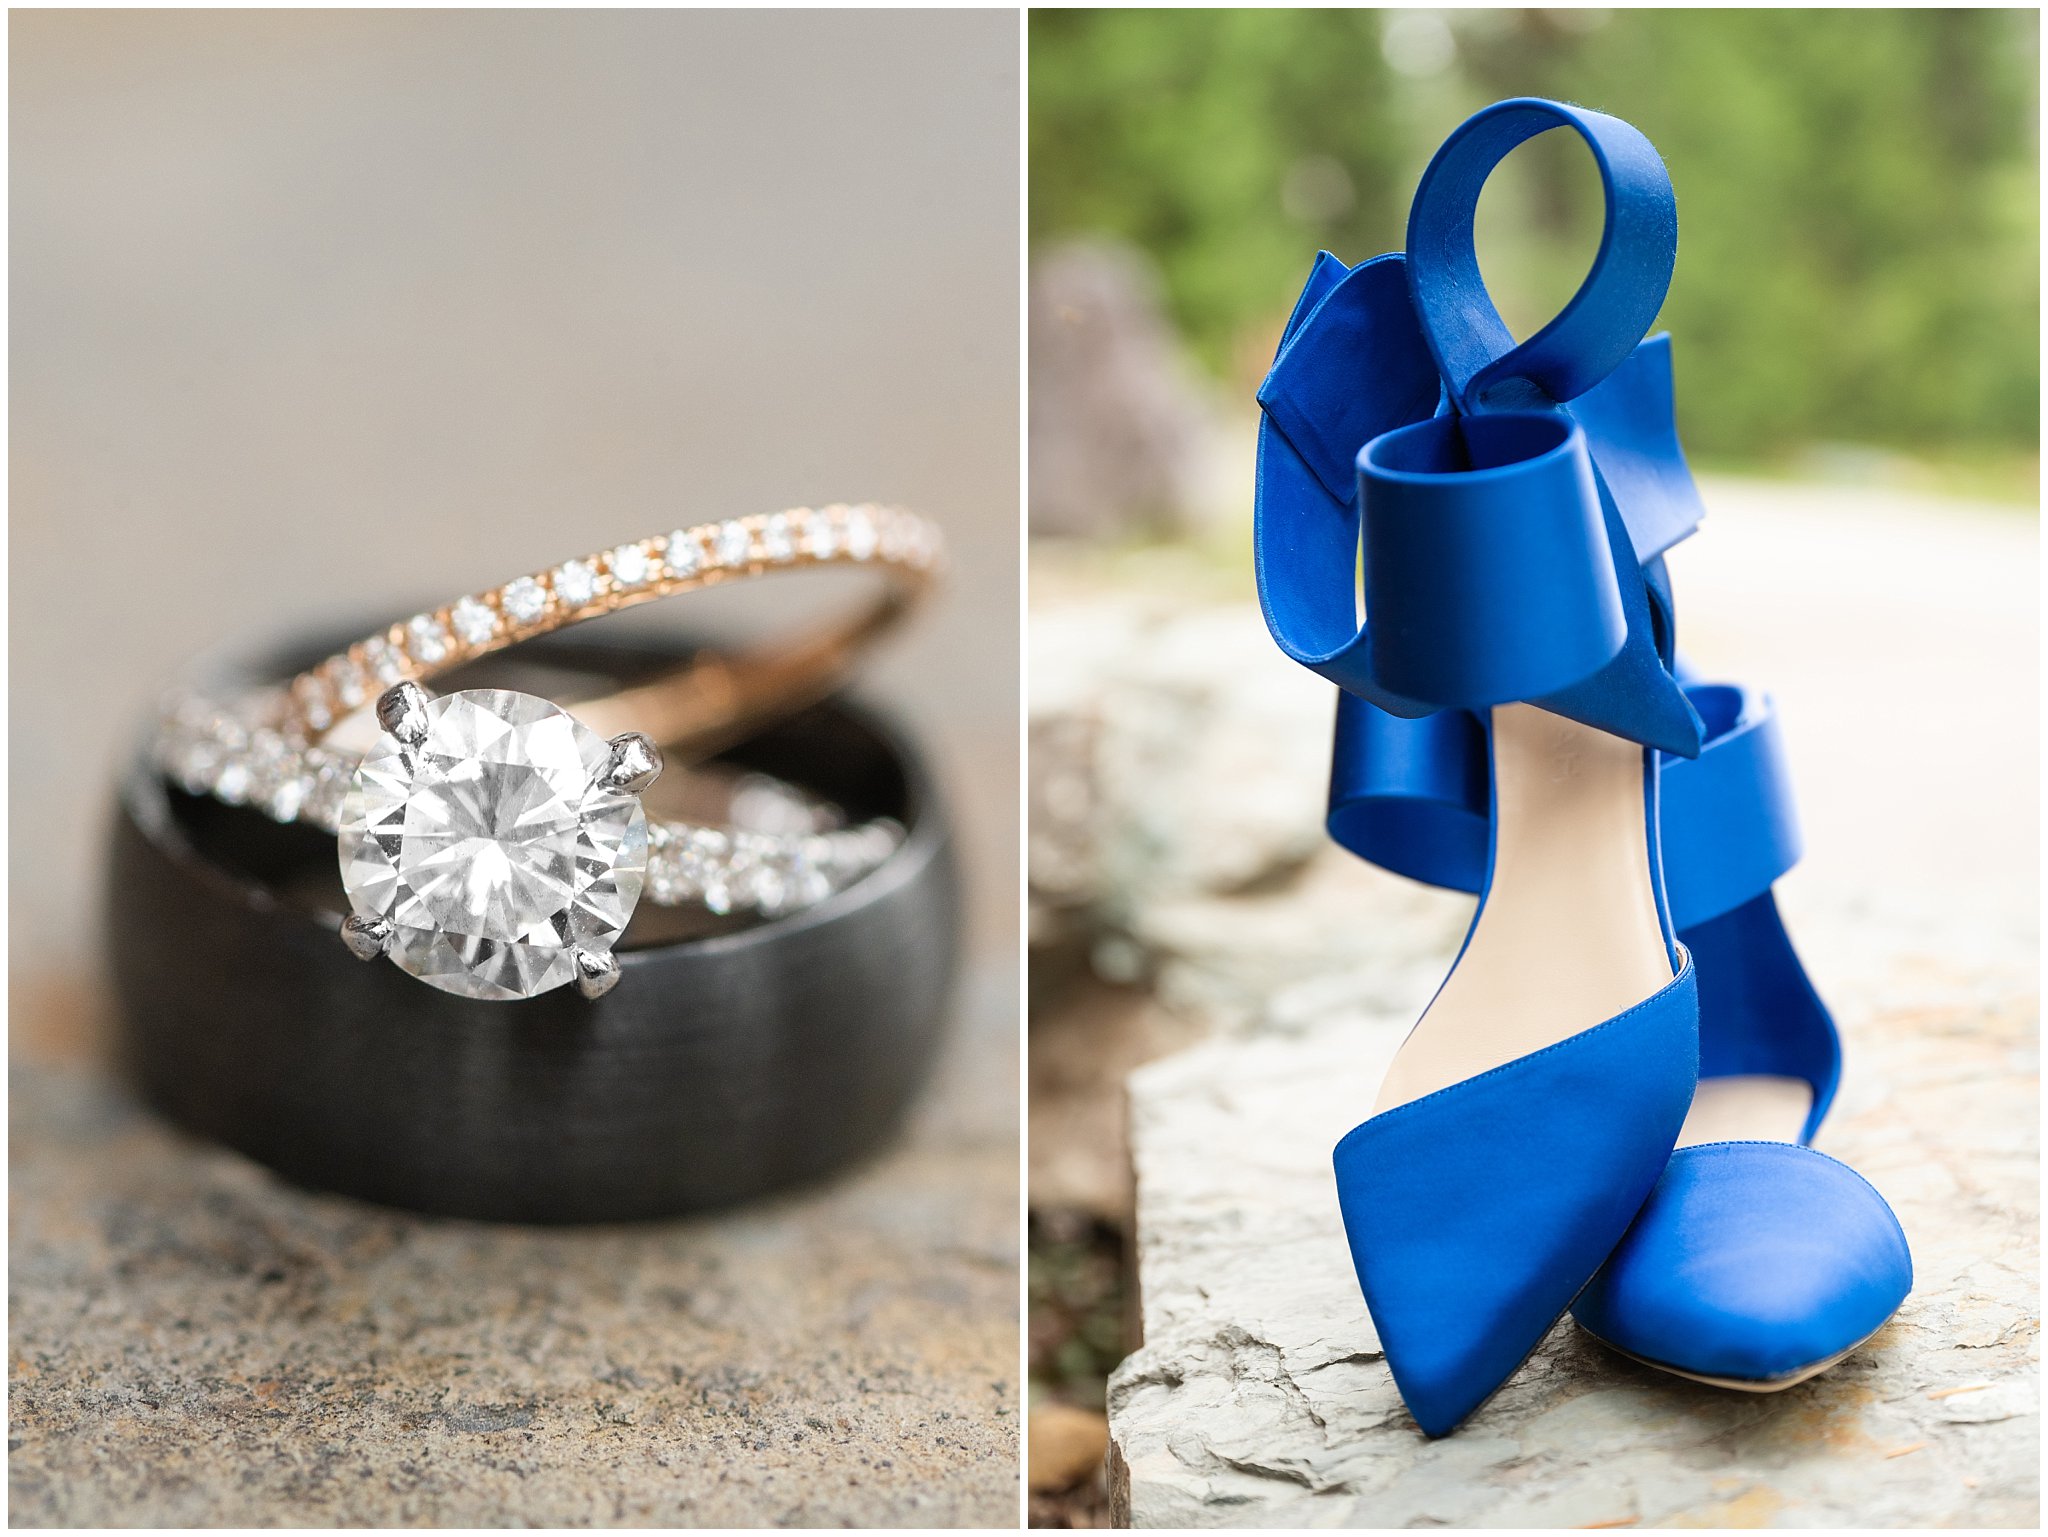 Tiffany ring and blue bridal shoes | Mountainside Weddings Kalispell Montana Destination Wedding | Jessie and Dallin Photography